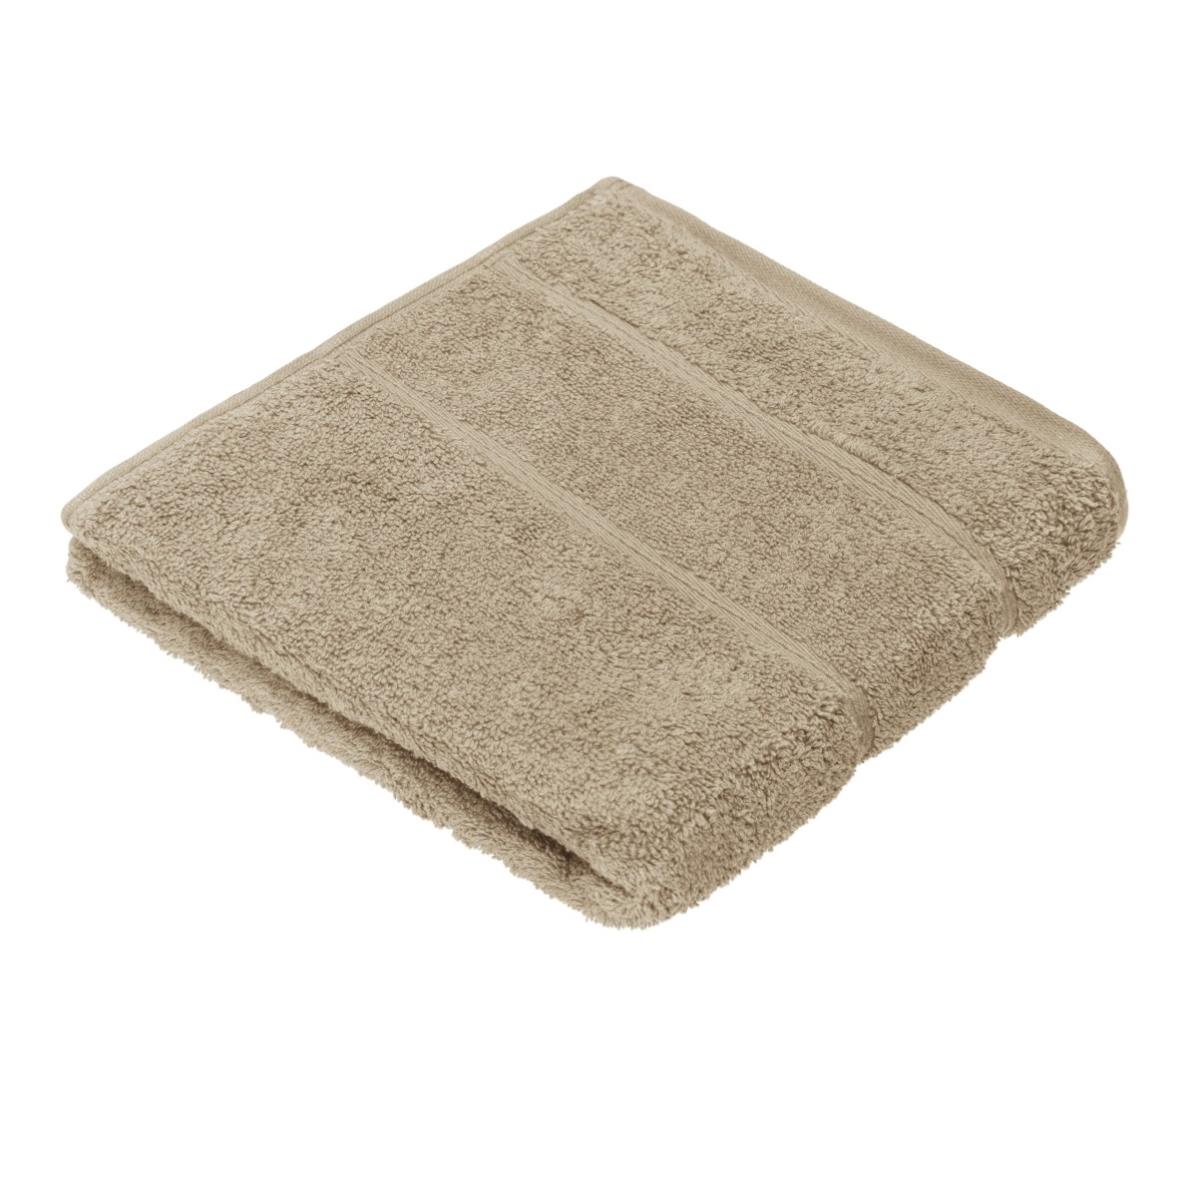 Online-Shop Dreams - Siemers Frottiertuch Living Luxus taupe